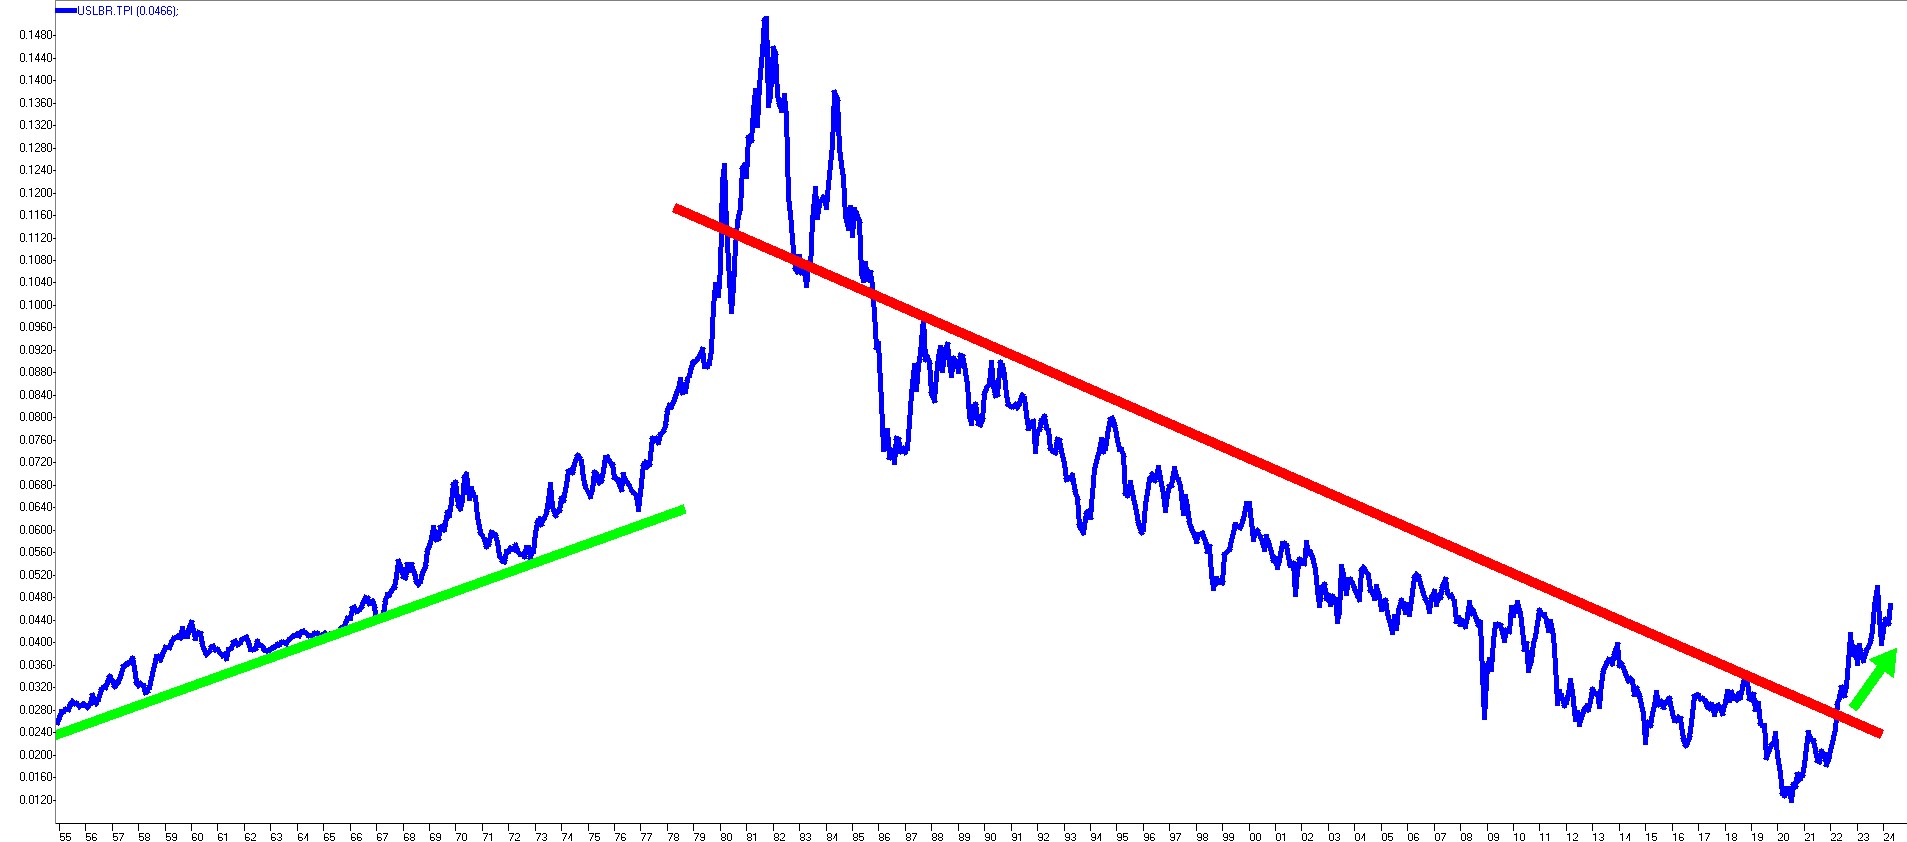 US 30 year bond yield cycle has turned positive after 40 years up cycle followed by 40 year down cycle.